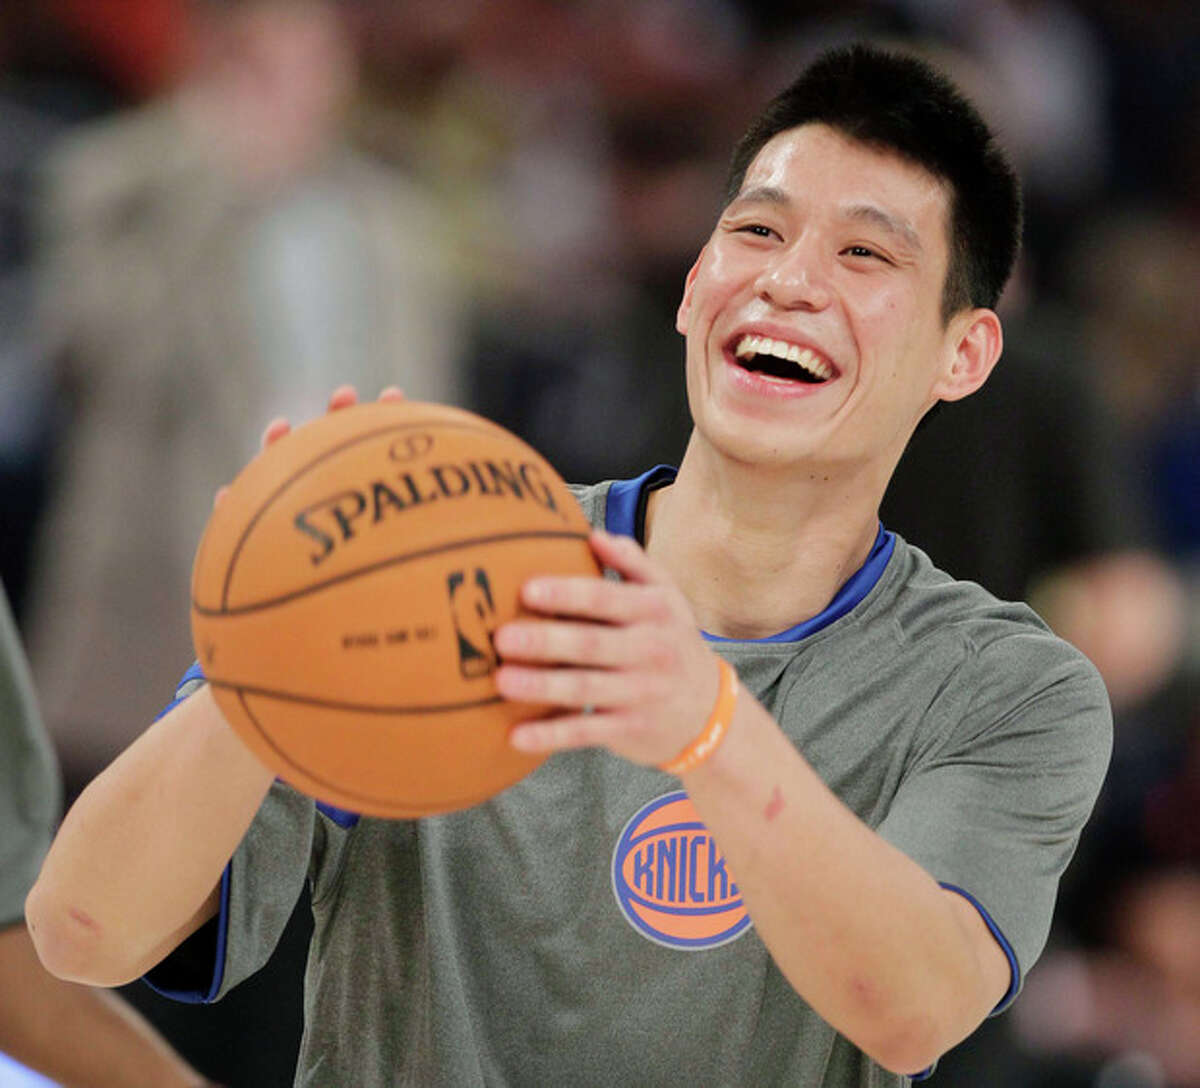 FILE - This Feb. 24, 2012 file photo shows New York Knicks' Jeremy Lin laughing during warmups before the start of the NBA All-Star Rising Stars Challenge basketball game in Orlando, Fla. This would have been such an easy decision in February. Lin was the biggest thing in basketball, and no way the Knicks would have let him go elsewhere. Now, knowing his price and with no assurance he'll play as he did when Linsanity reigned, the Knicks may allow Lin to leave for Houston. (AP Photo/Chris O'Meara, File)